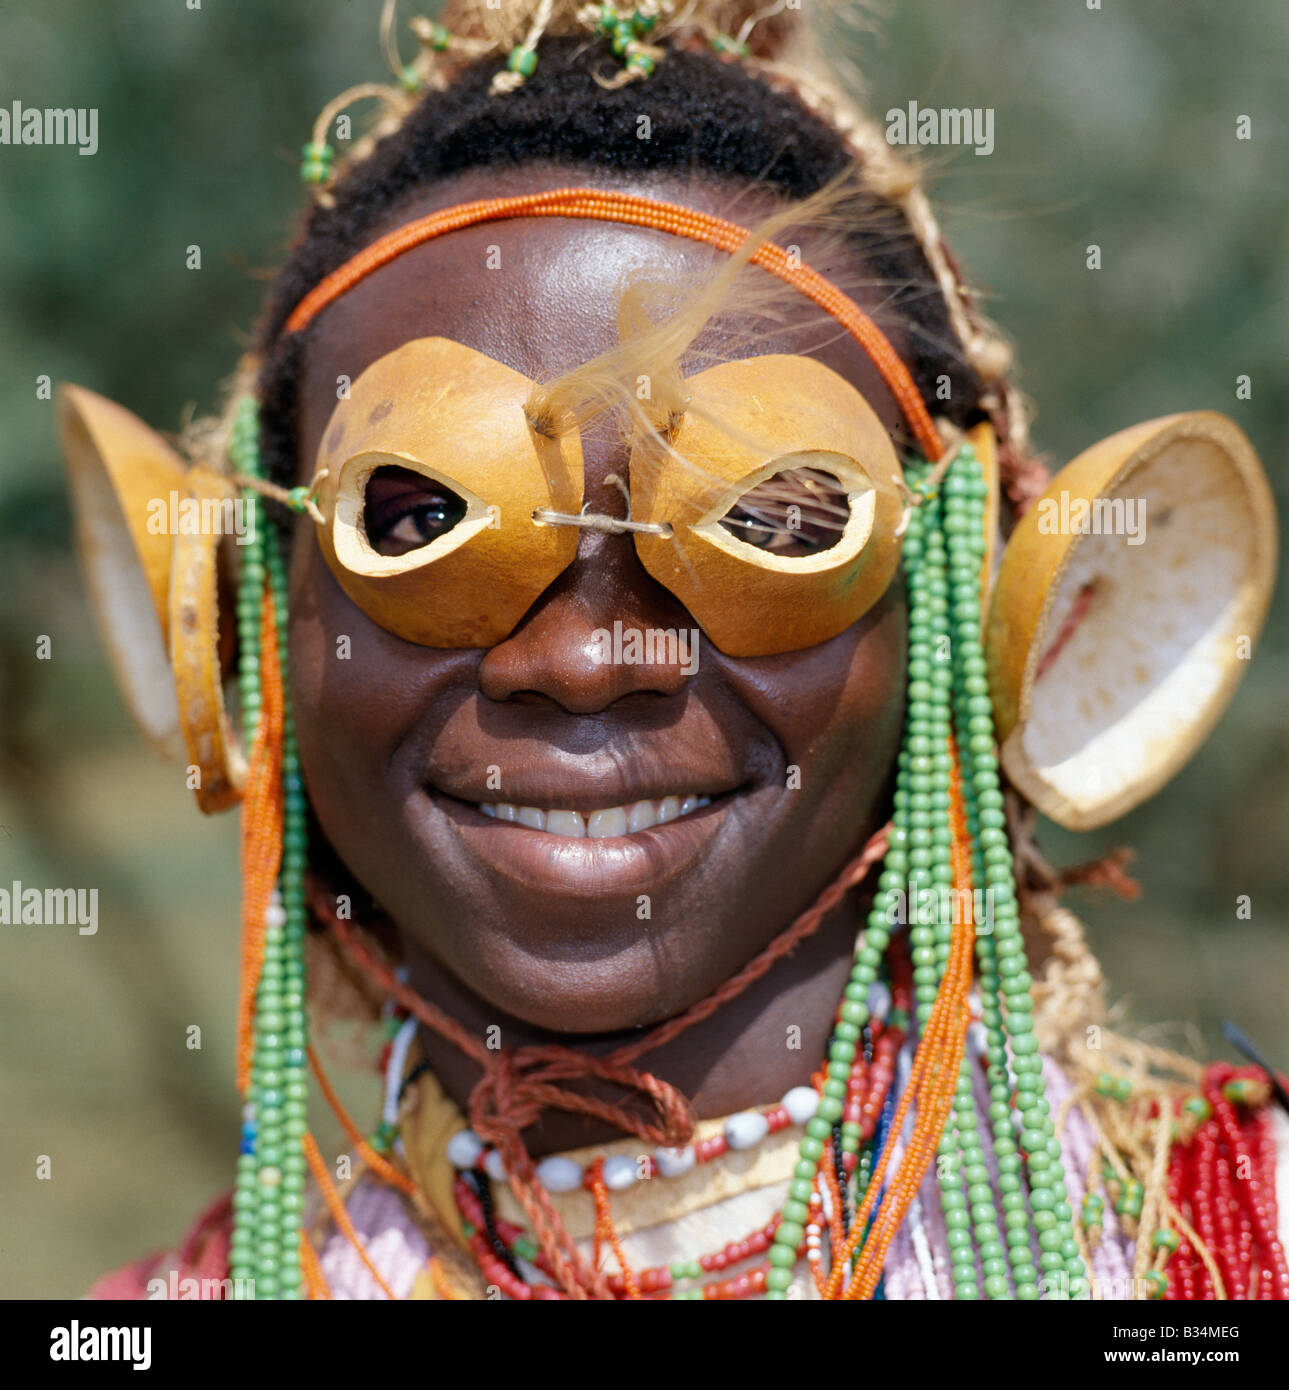 Kenya, Coast Province, Taita Hills. An Mtaita musician. His 'glasses' are made from the tips of calabashes. His ear ornaments are also made of calabashes or gourds. Stock Photo